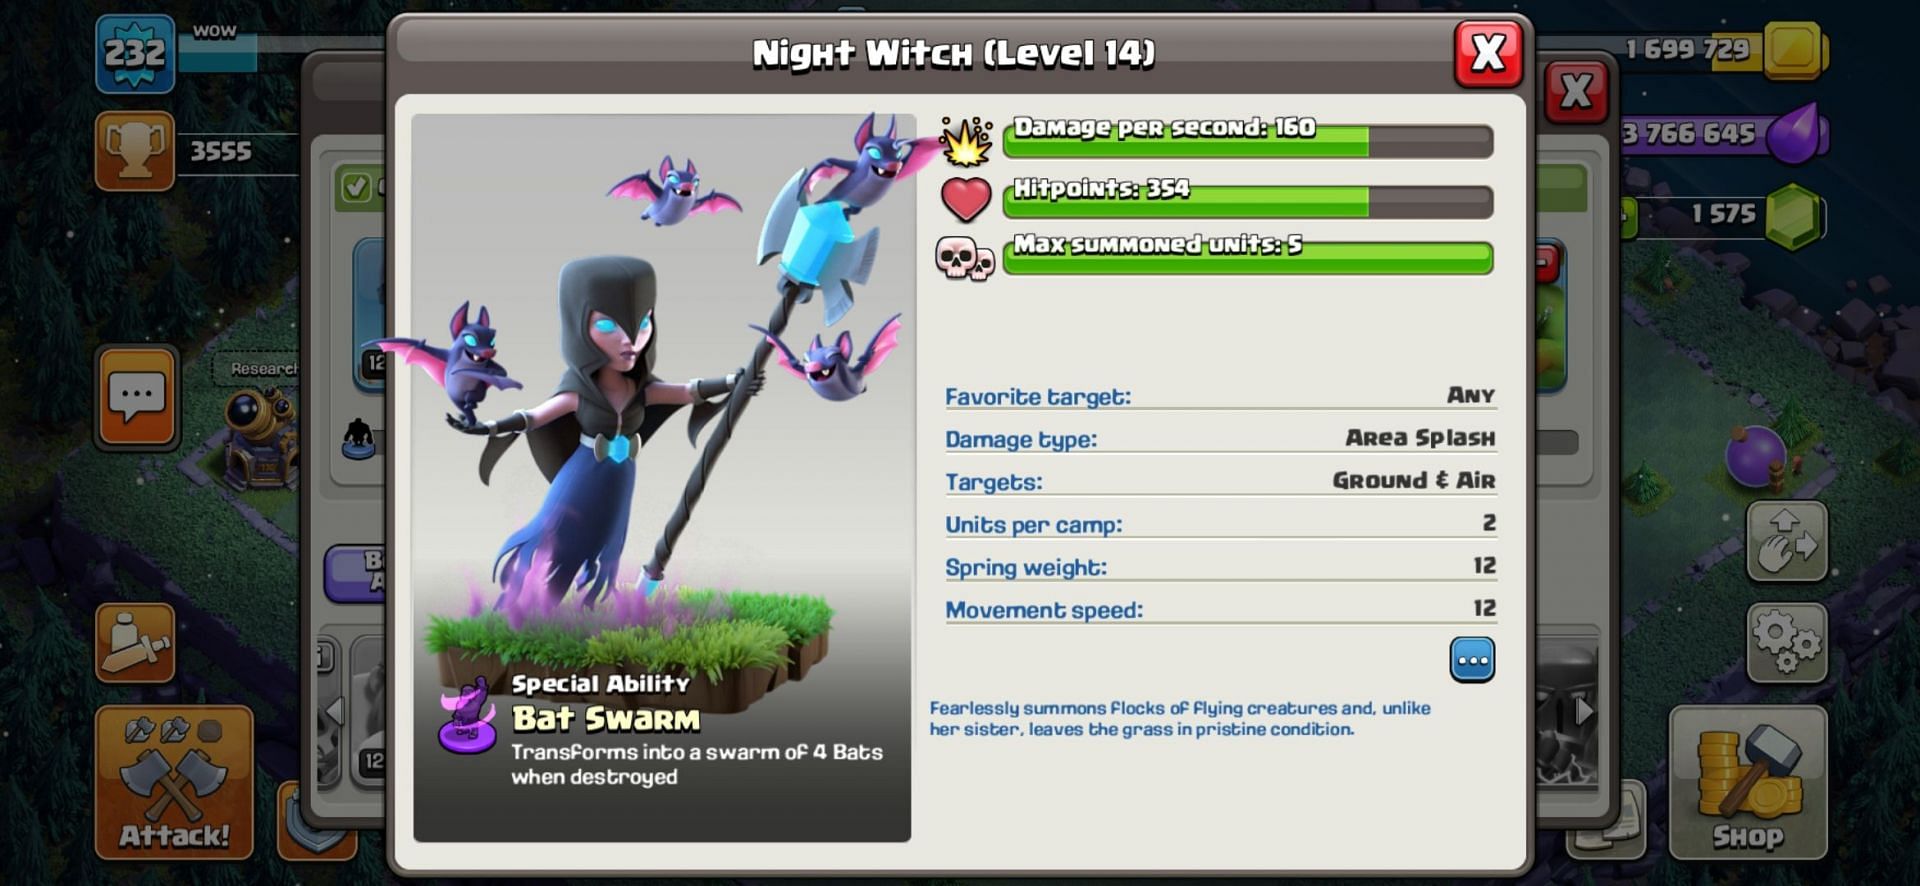 Night Witch in Clash of Clans (Image via Sportskeeda)